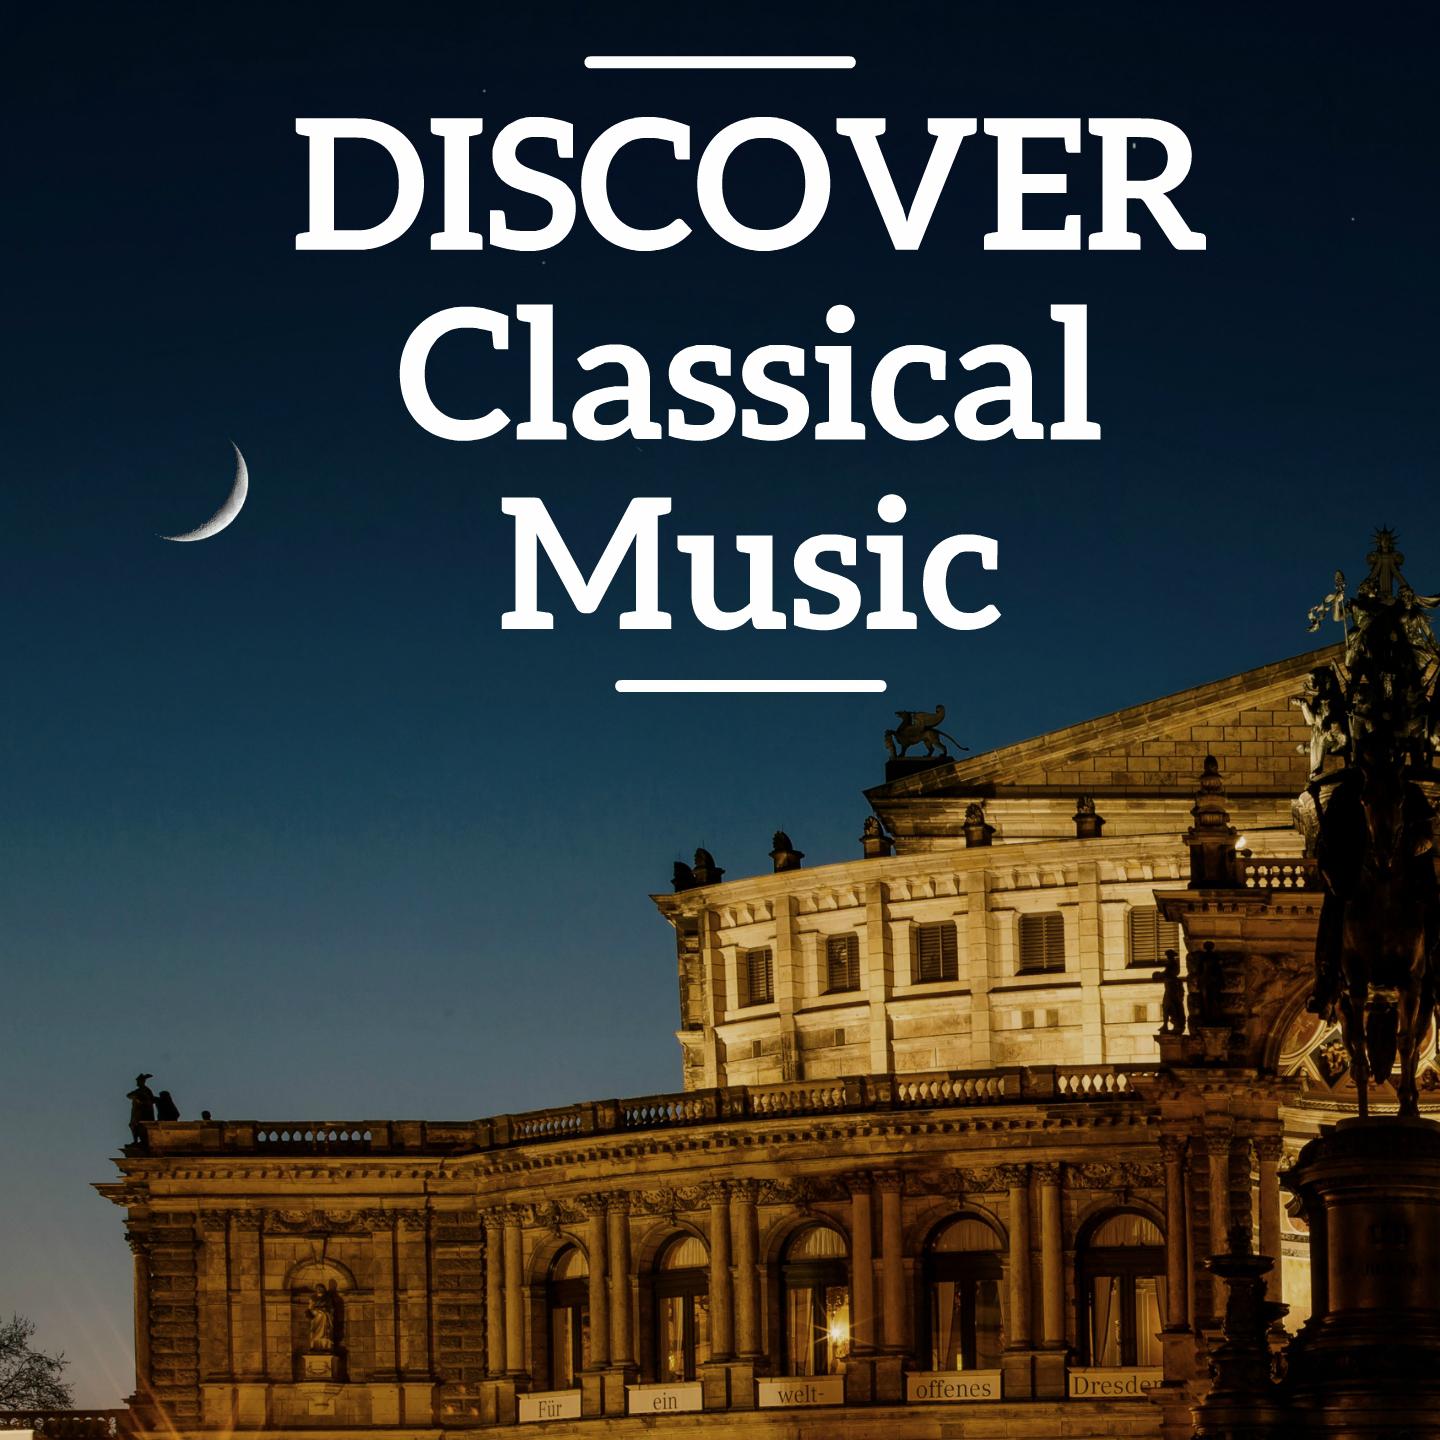 Discover Classical Music